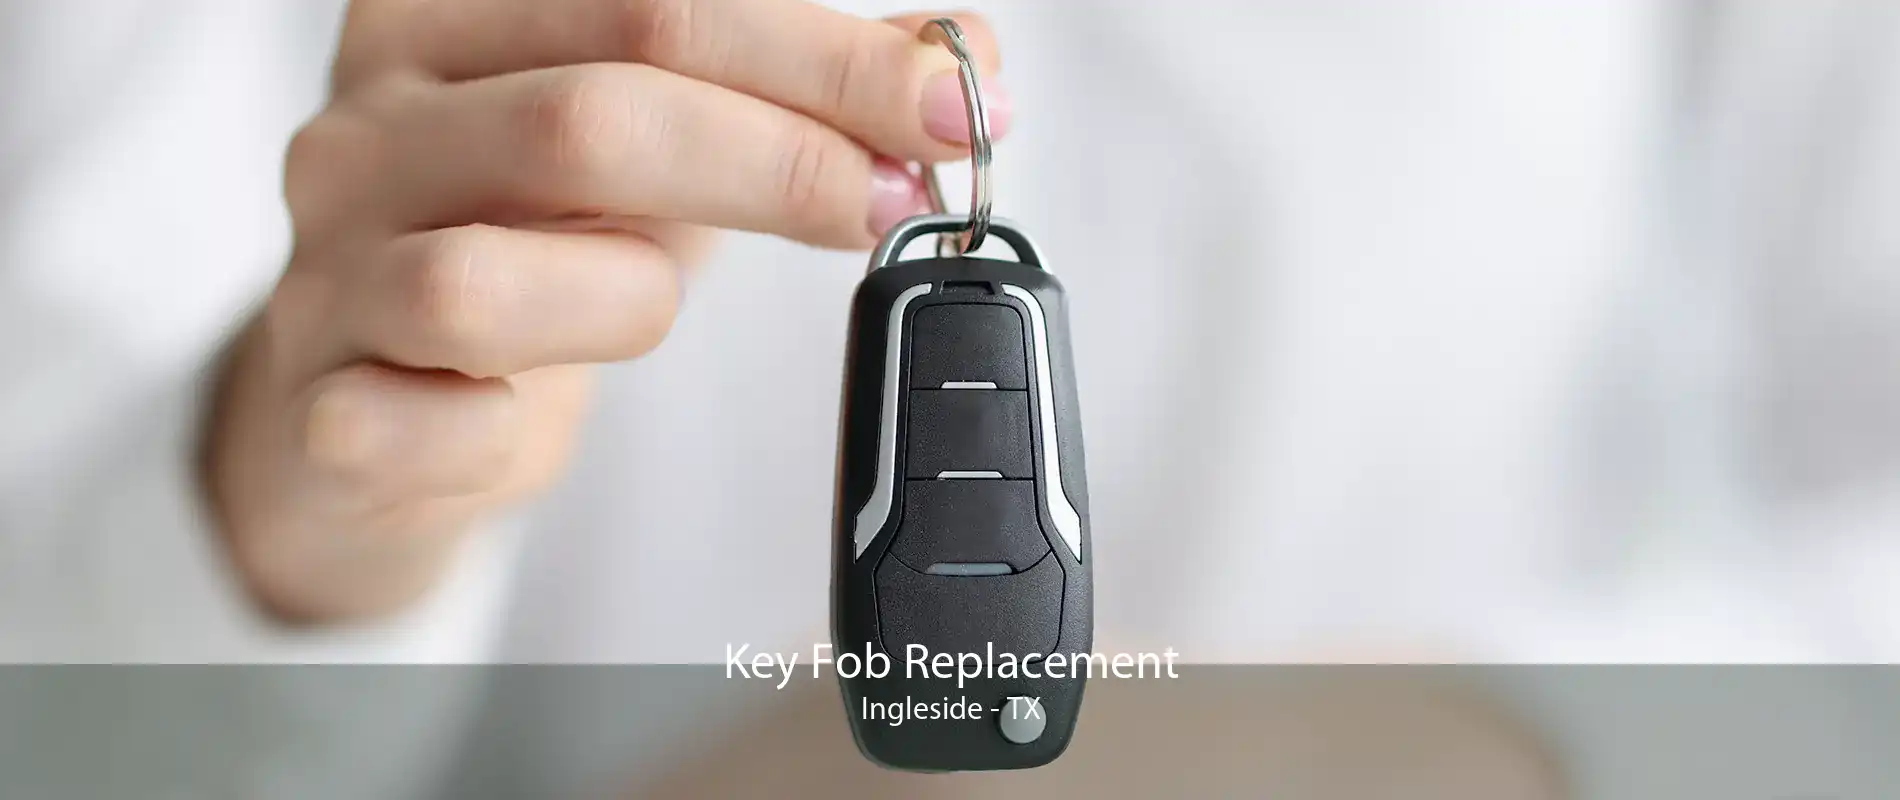 Key Fob Replacement Ingleside - TX